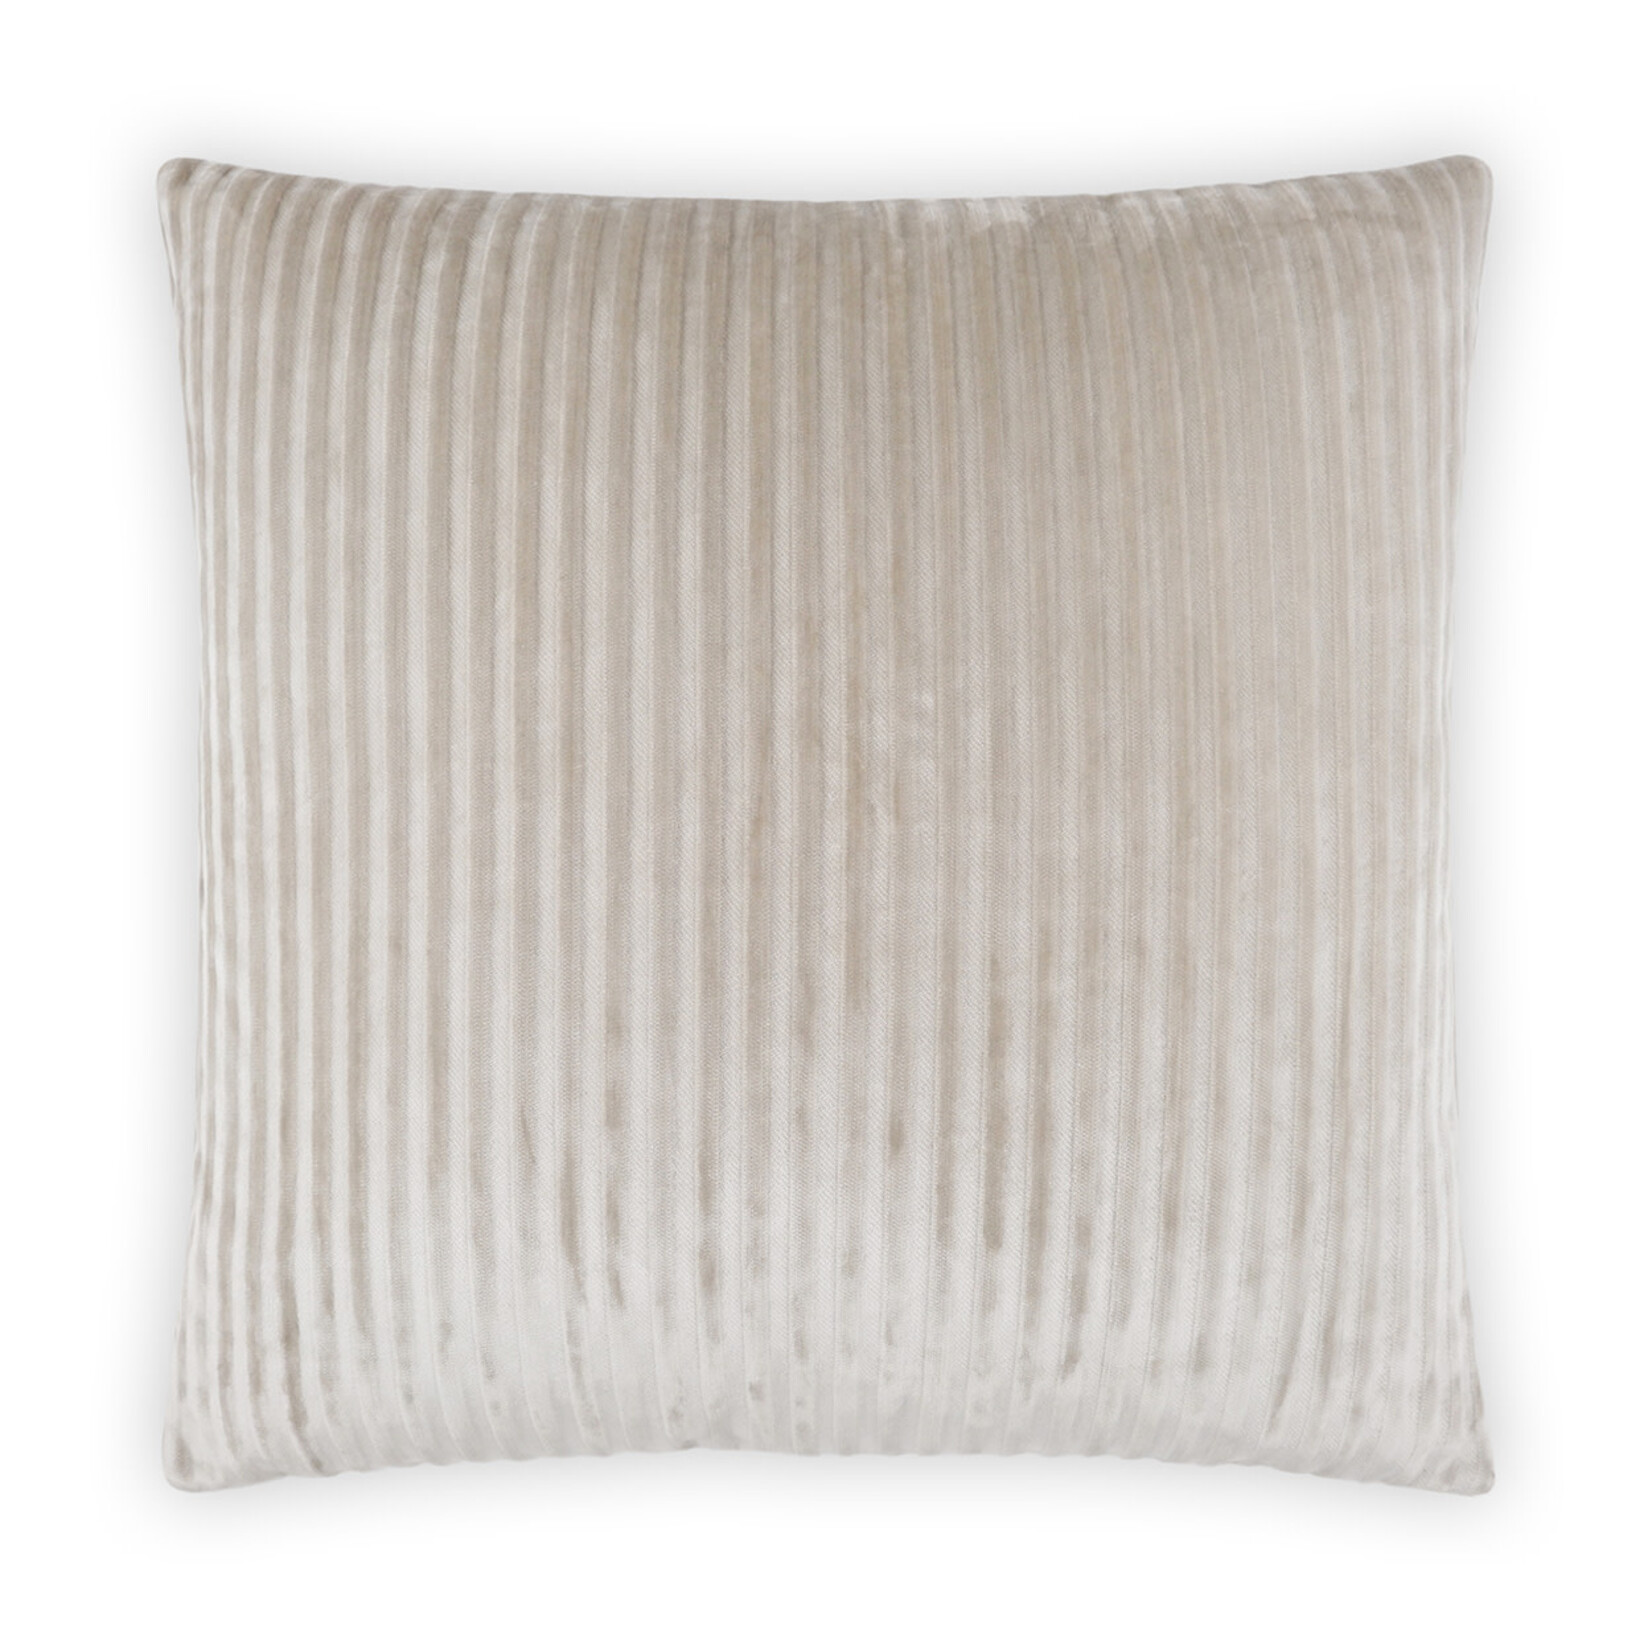 Outside The Box 24x24 Hayworth Square Feather Down Pillow In Ecru